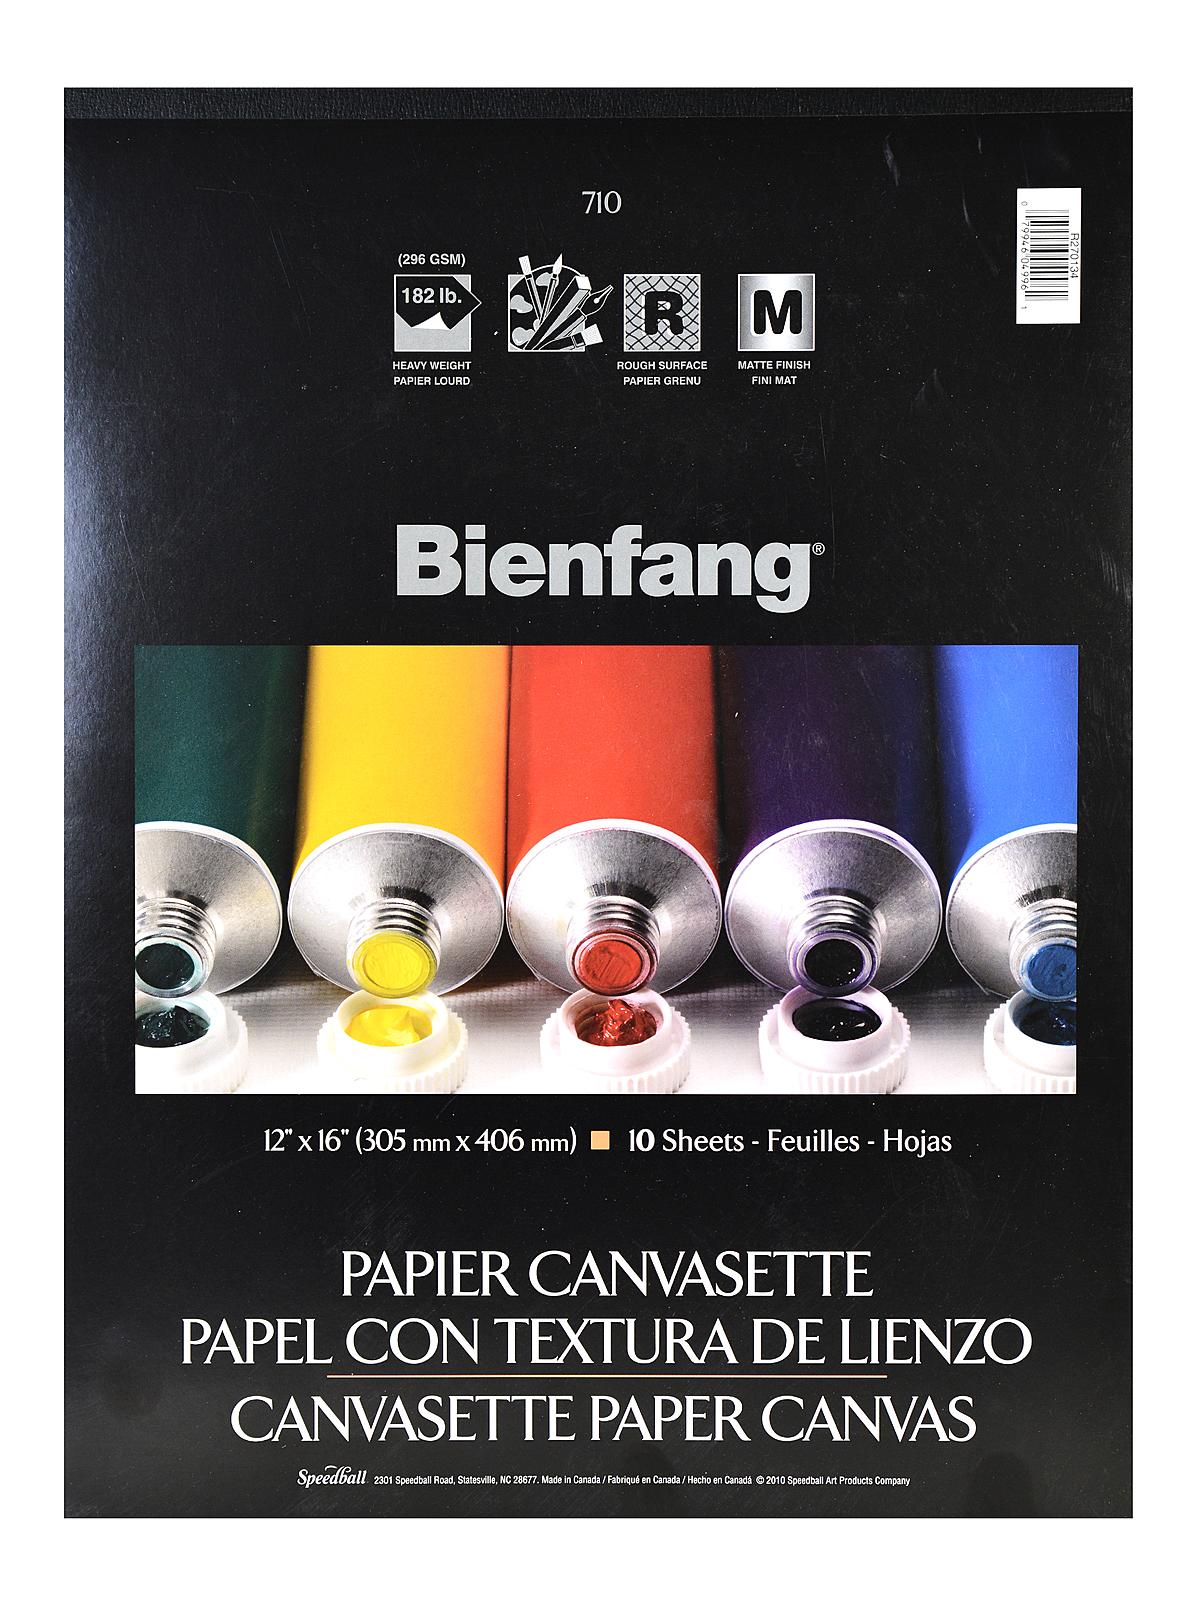 Bienfang Canvasette Paper 10-Sheet Pad, 12 x 16 inches